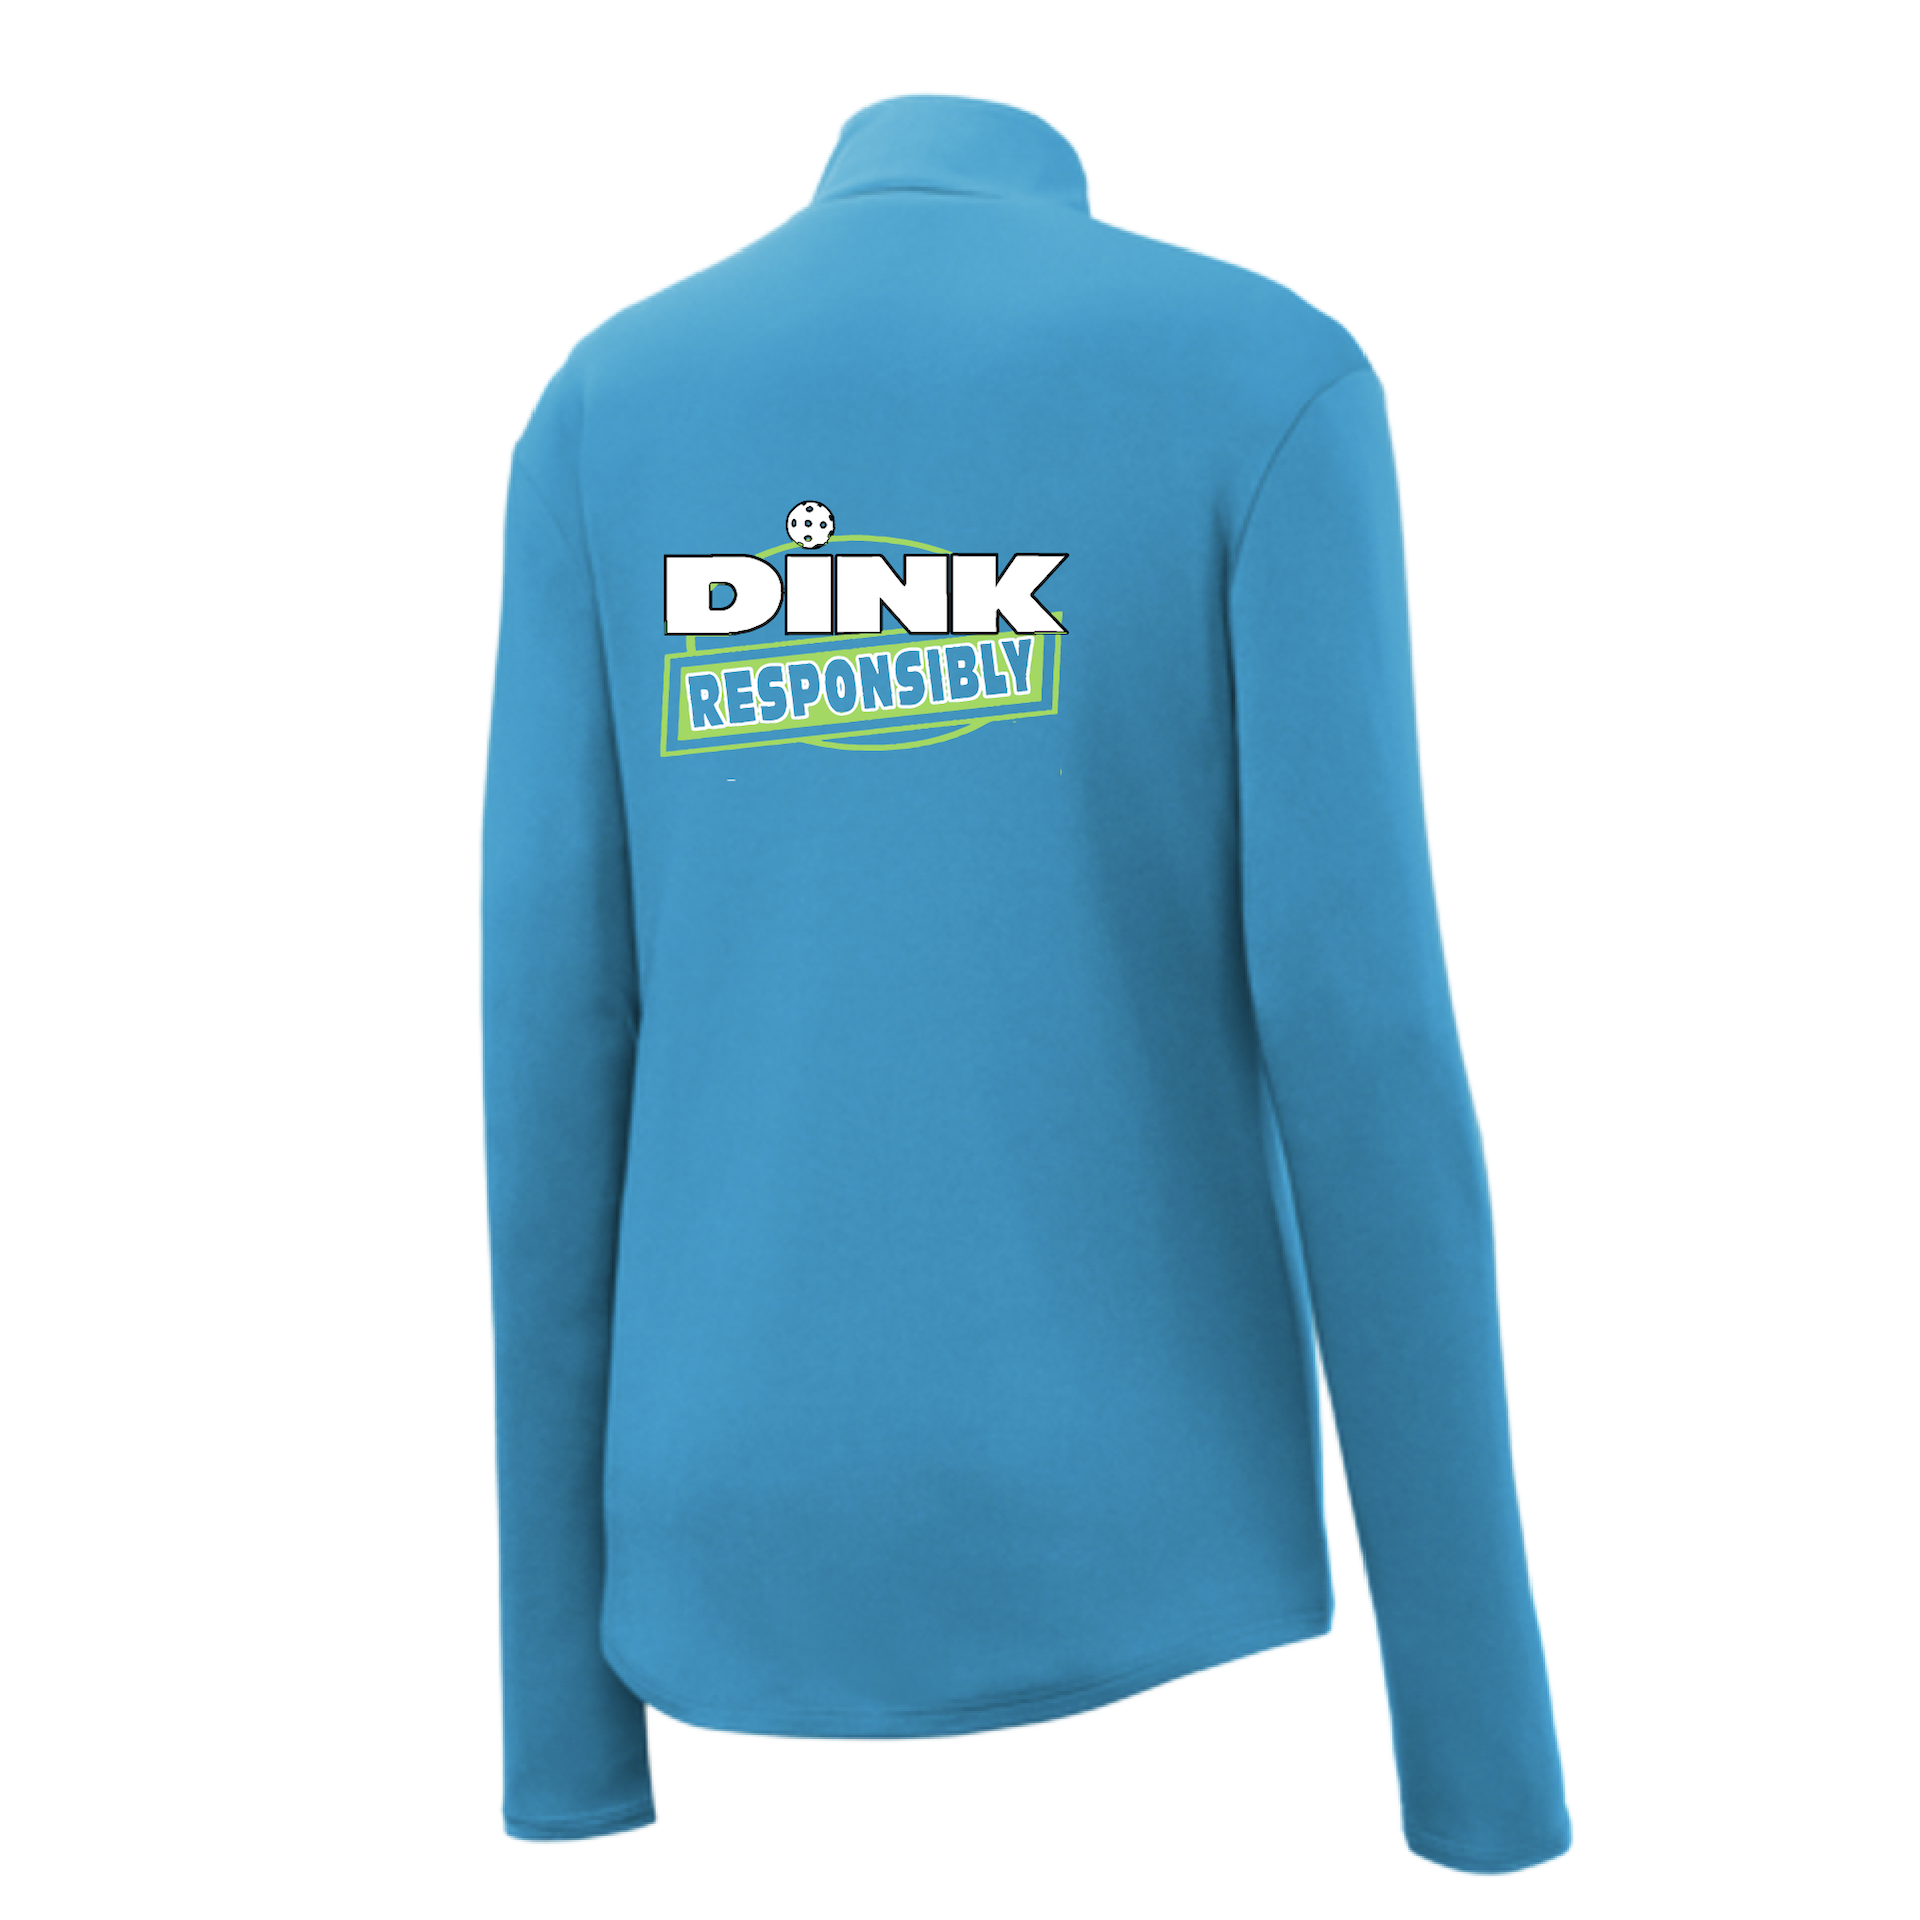 Pickleball Design: Dink Responsibly  Women's 1/4-Zip Pullover: Princess seams and Drop tail hem.  Turn up the volume in this Women's shirt with its perfect mix of softness and attitude. Material is ultra-comfortable with moisture wicking properties and tri-blend softness. PosiCharge technology locks in color. Highly breathable and lightweight. Versatile enough for wearing year-round.